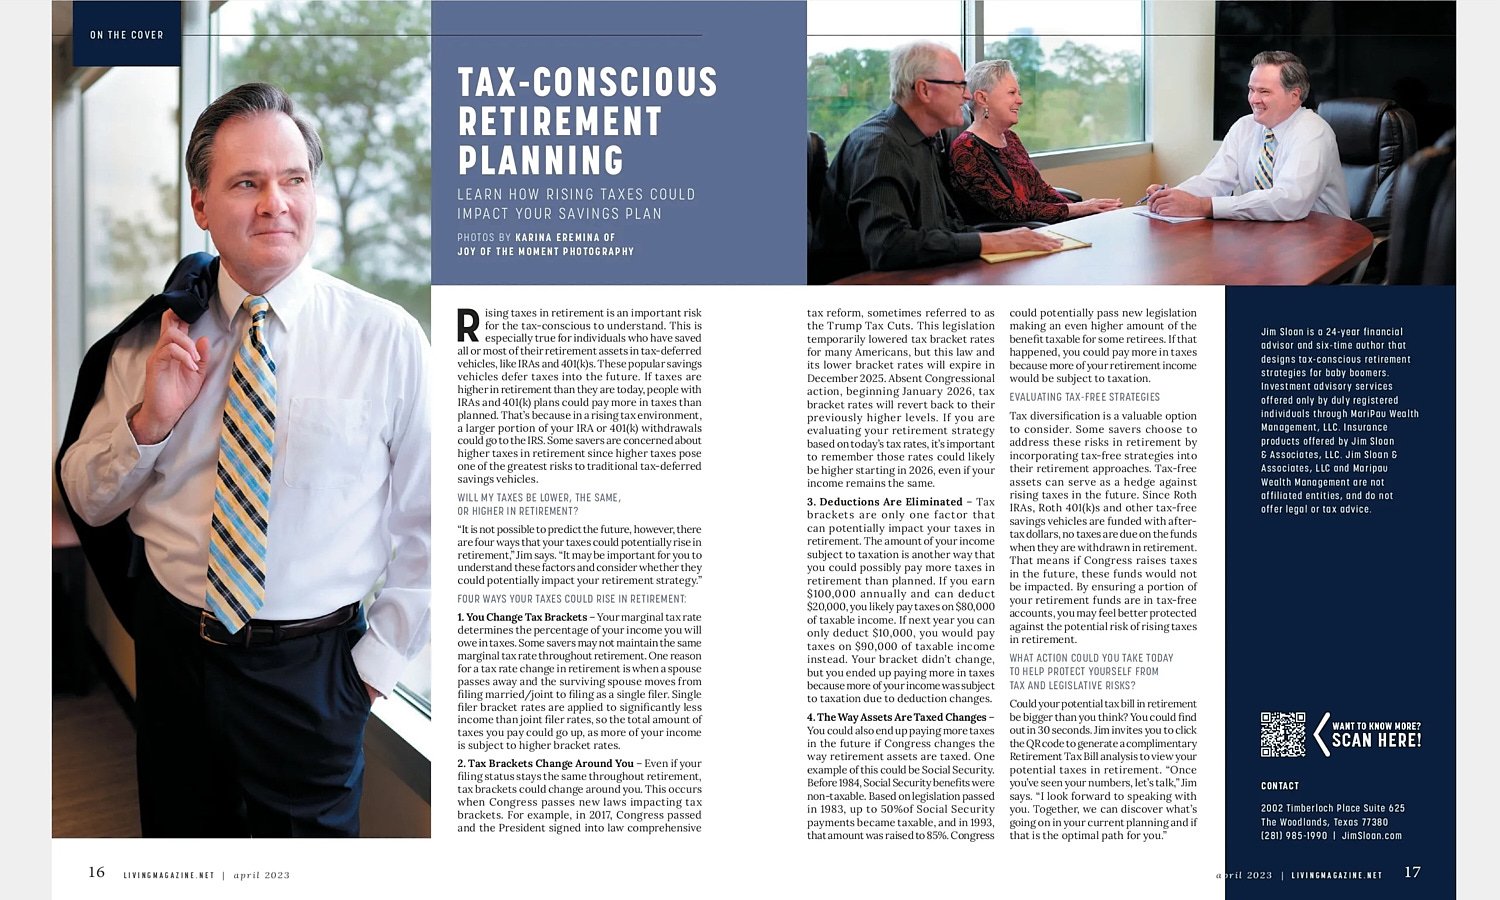  THE WOODLANDS, TEXAS - APRIL 2023: Jim Sloan, a wealth manager at Jim Sloan & Associates, is posing in his office for a feature in Living Magazine South about the rising tax environment & retirement. 